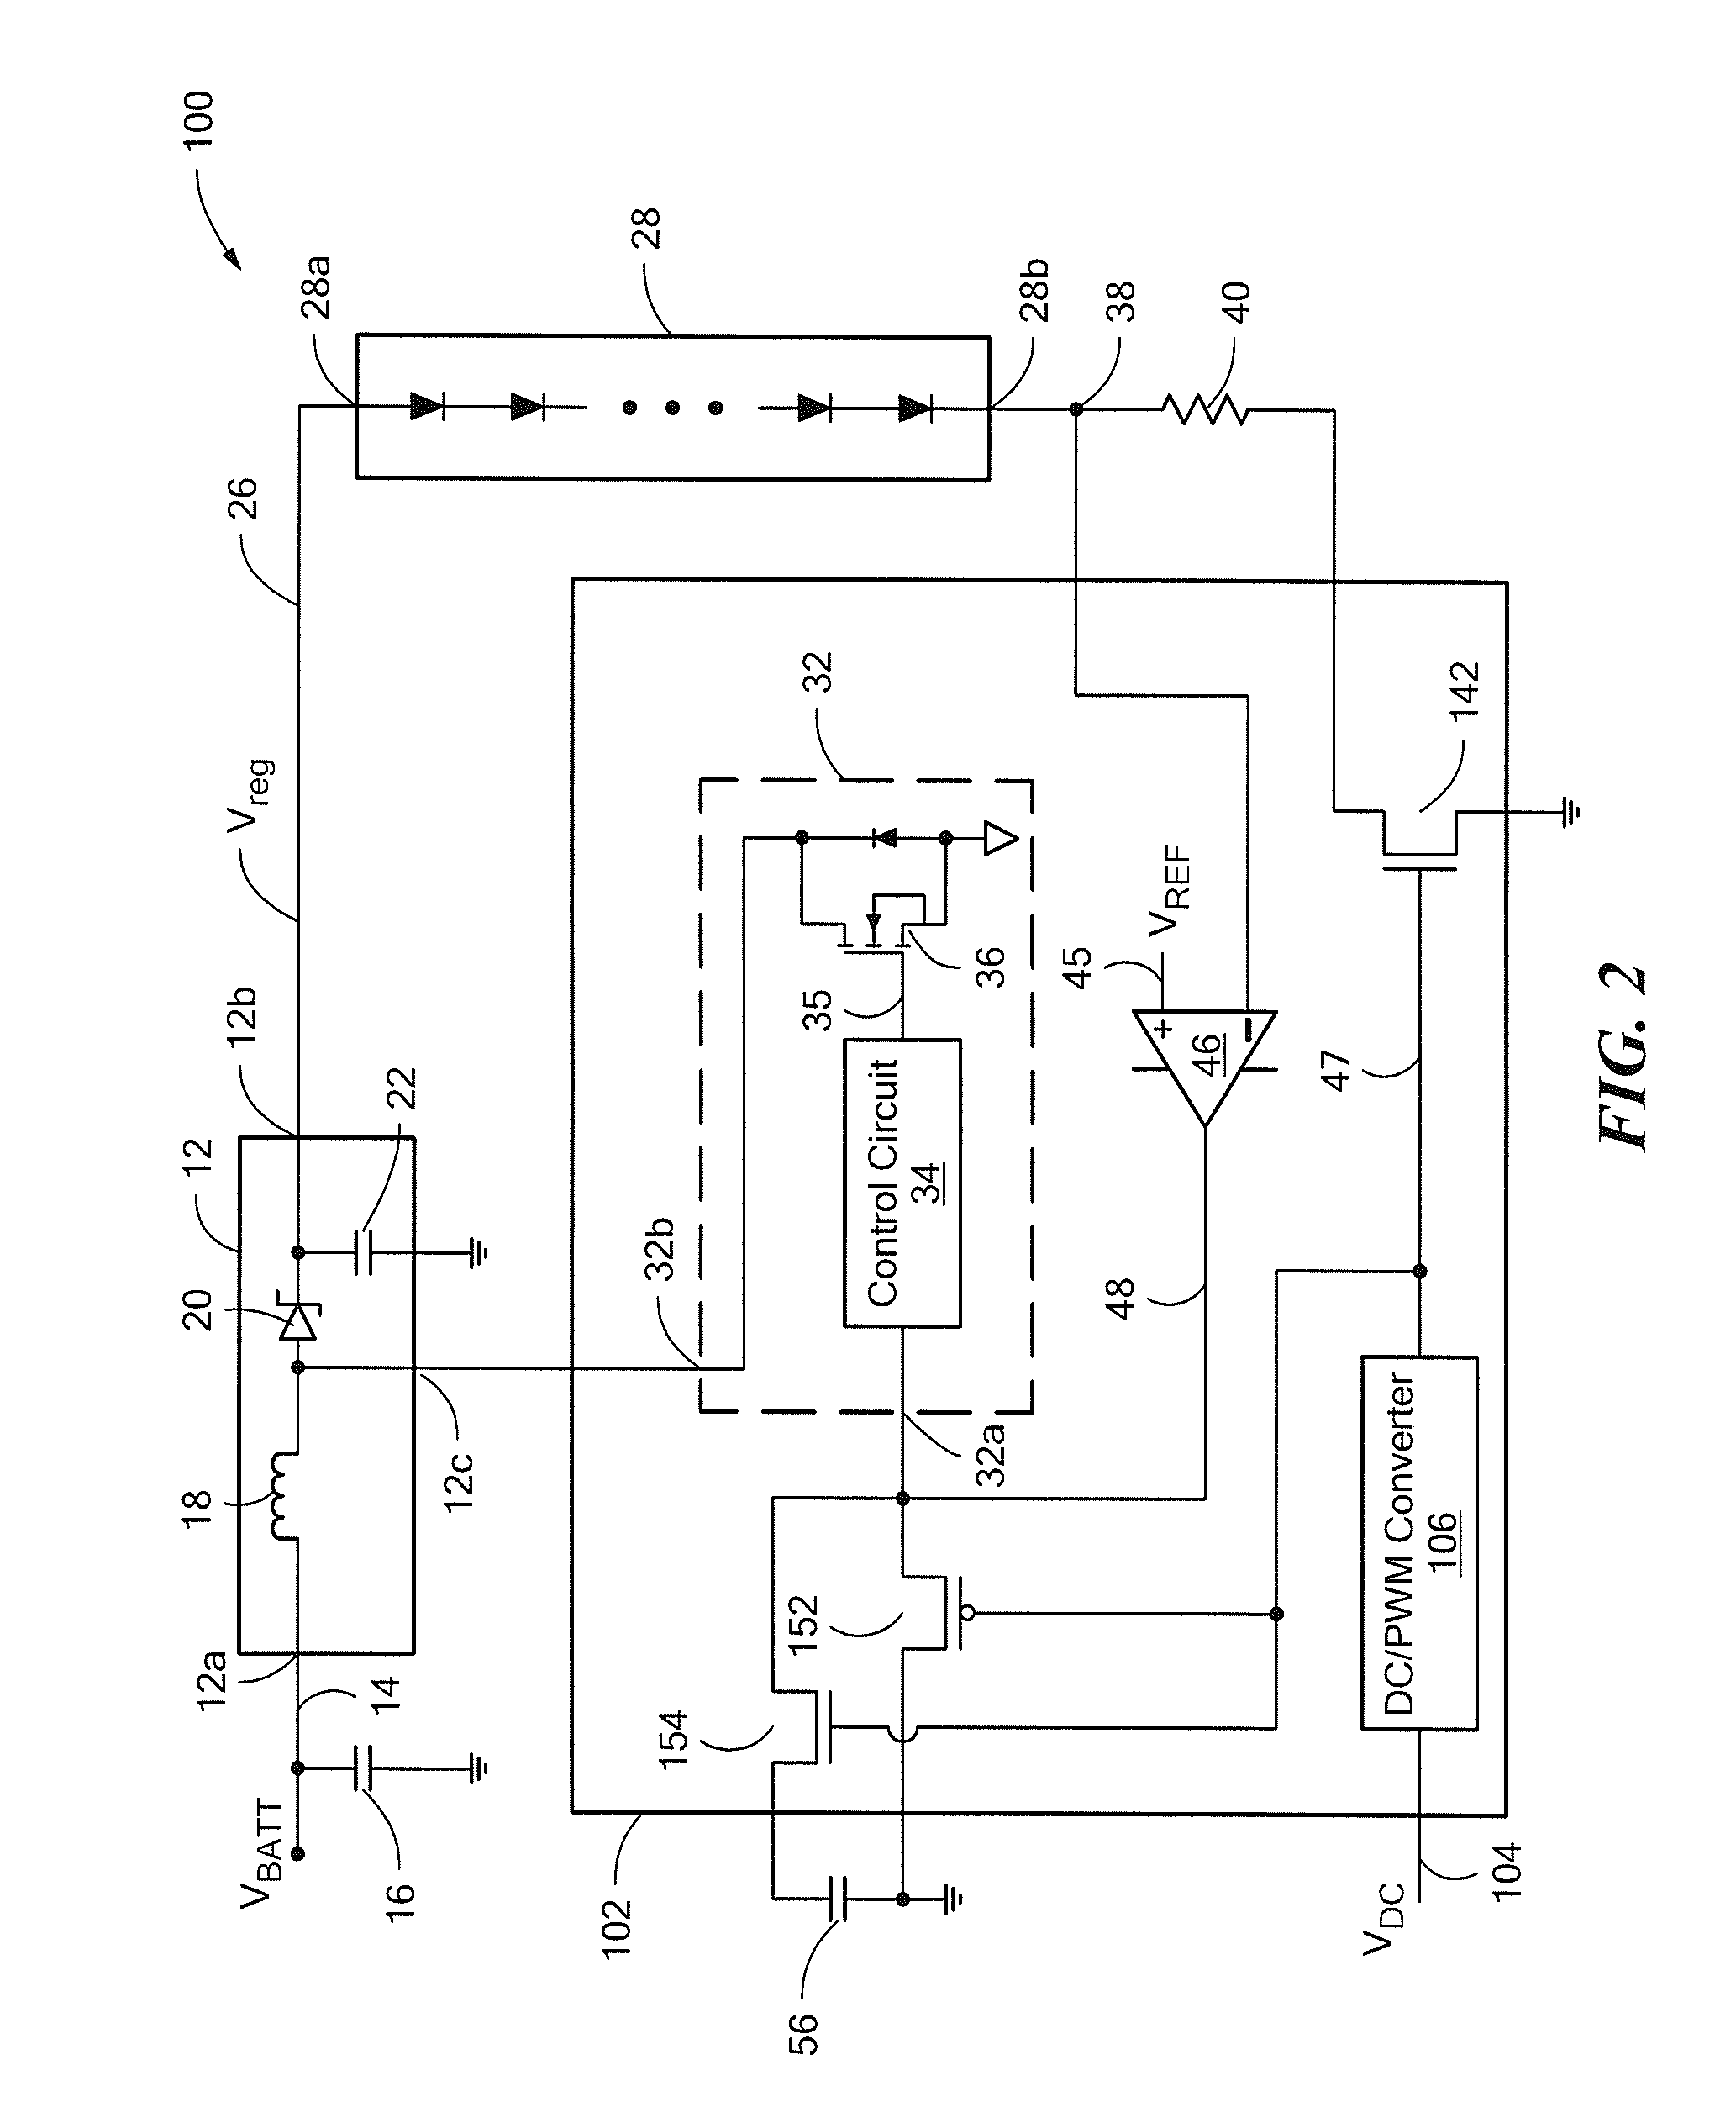 Electronic circuits and methods for driving a diode load